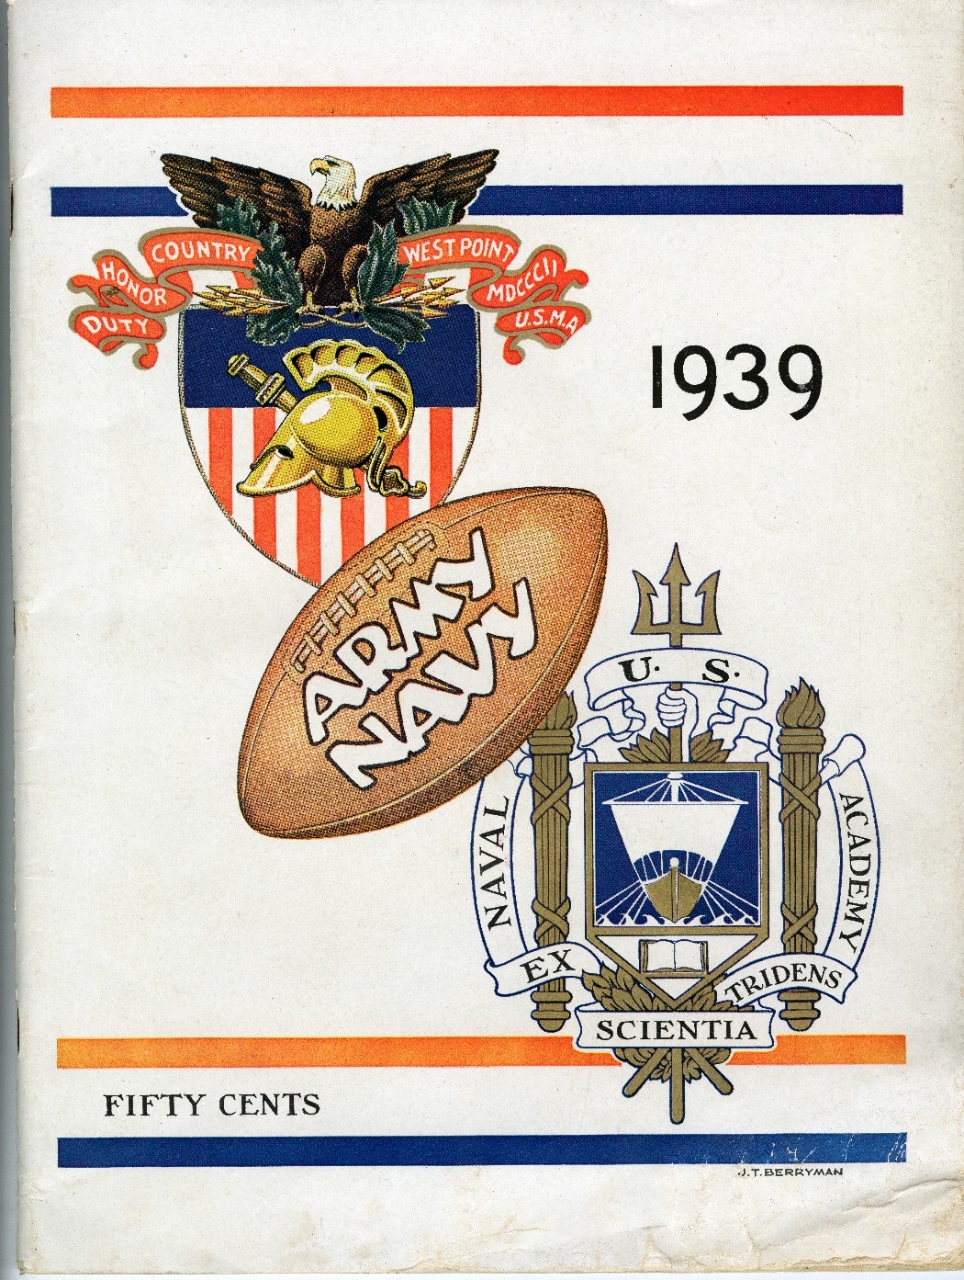 A 1939 program for the Army-Navy football game